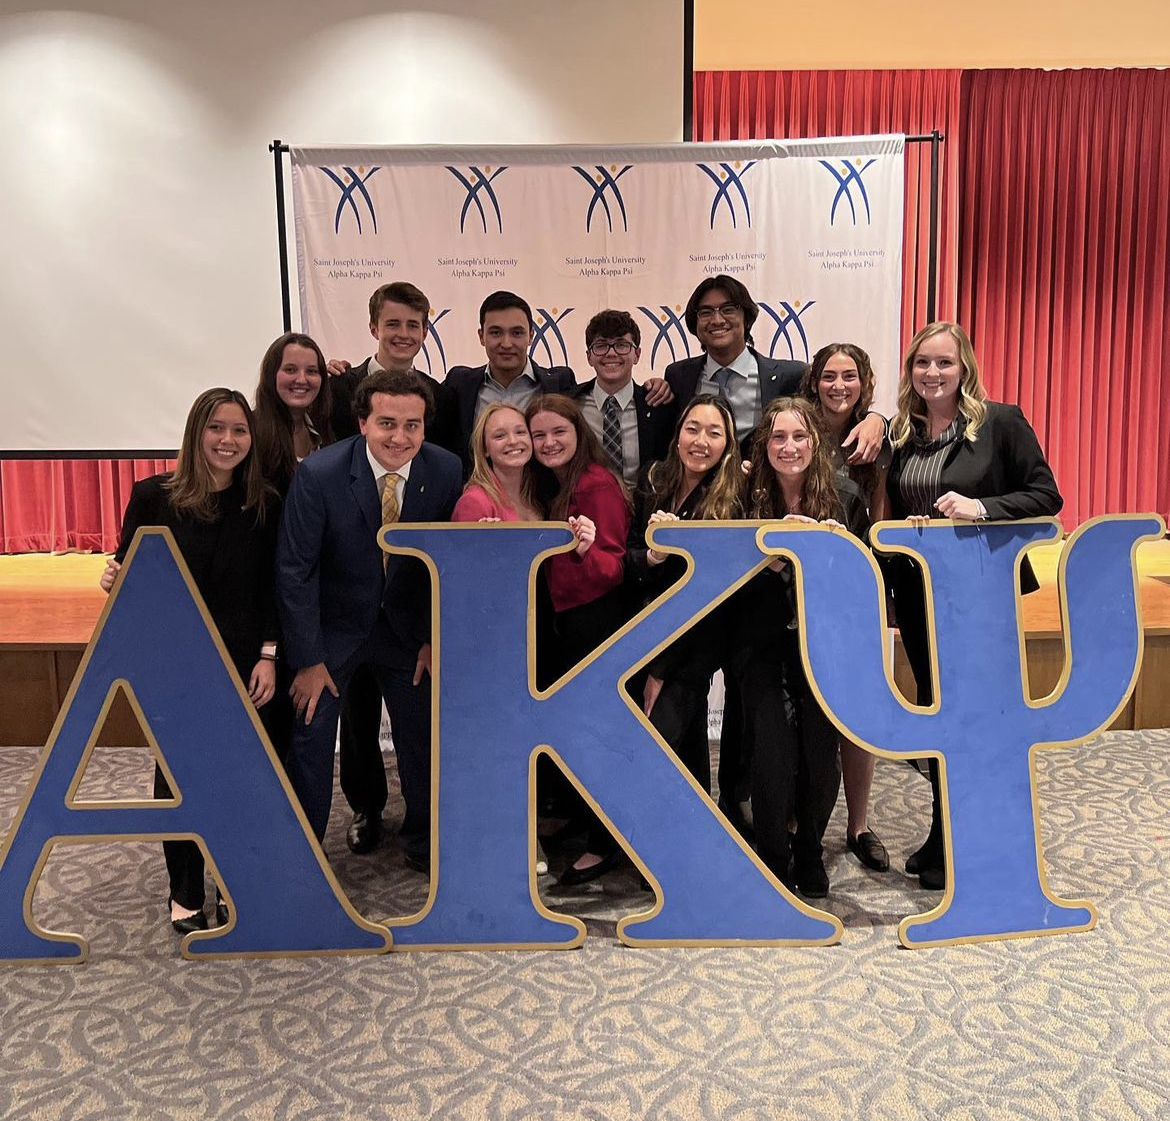 group of 13 college students wearing business prefessional clothing after being inducted into the fraternity alpha kappa psi. They are standing behing 3 large wooden letters a k and p that are blue and yellow. there is a white back drop behind them.